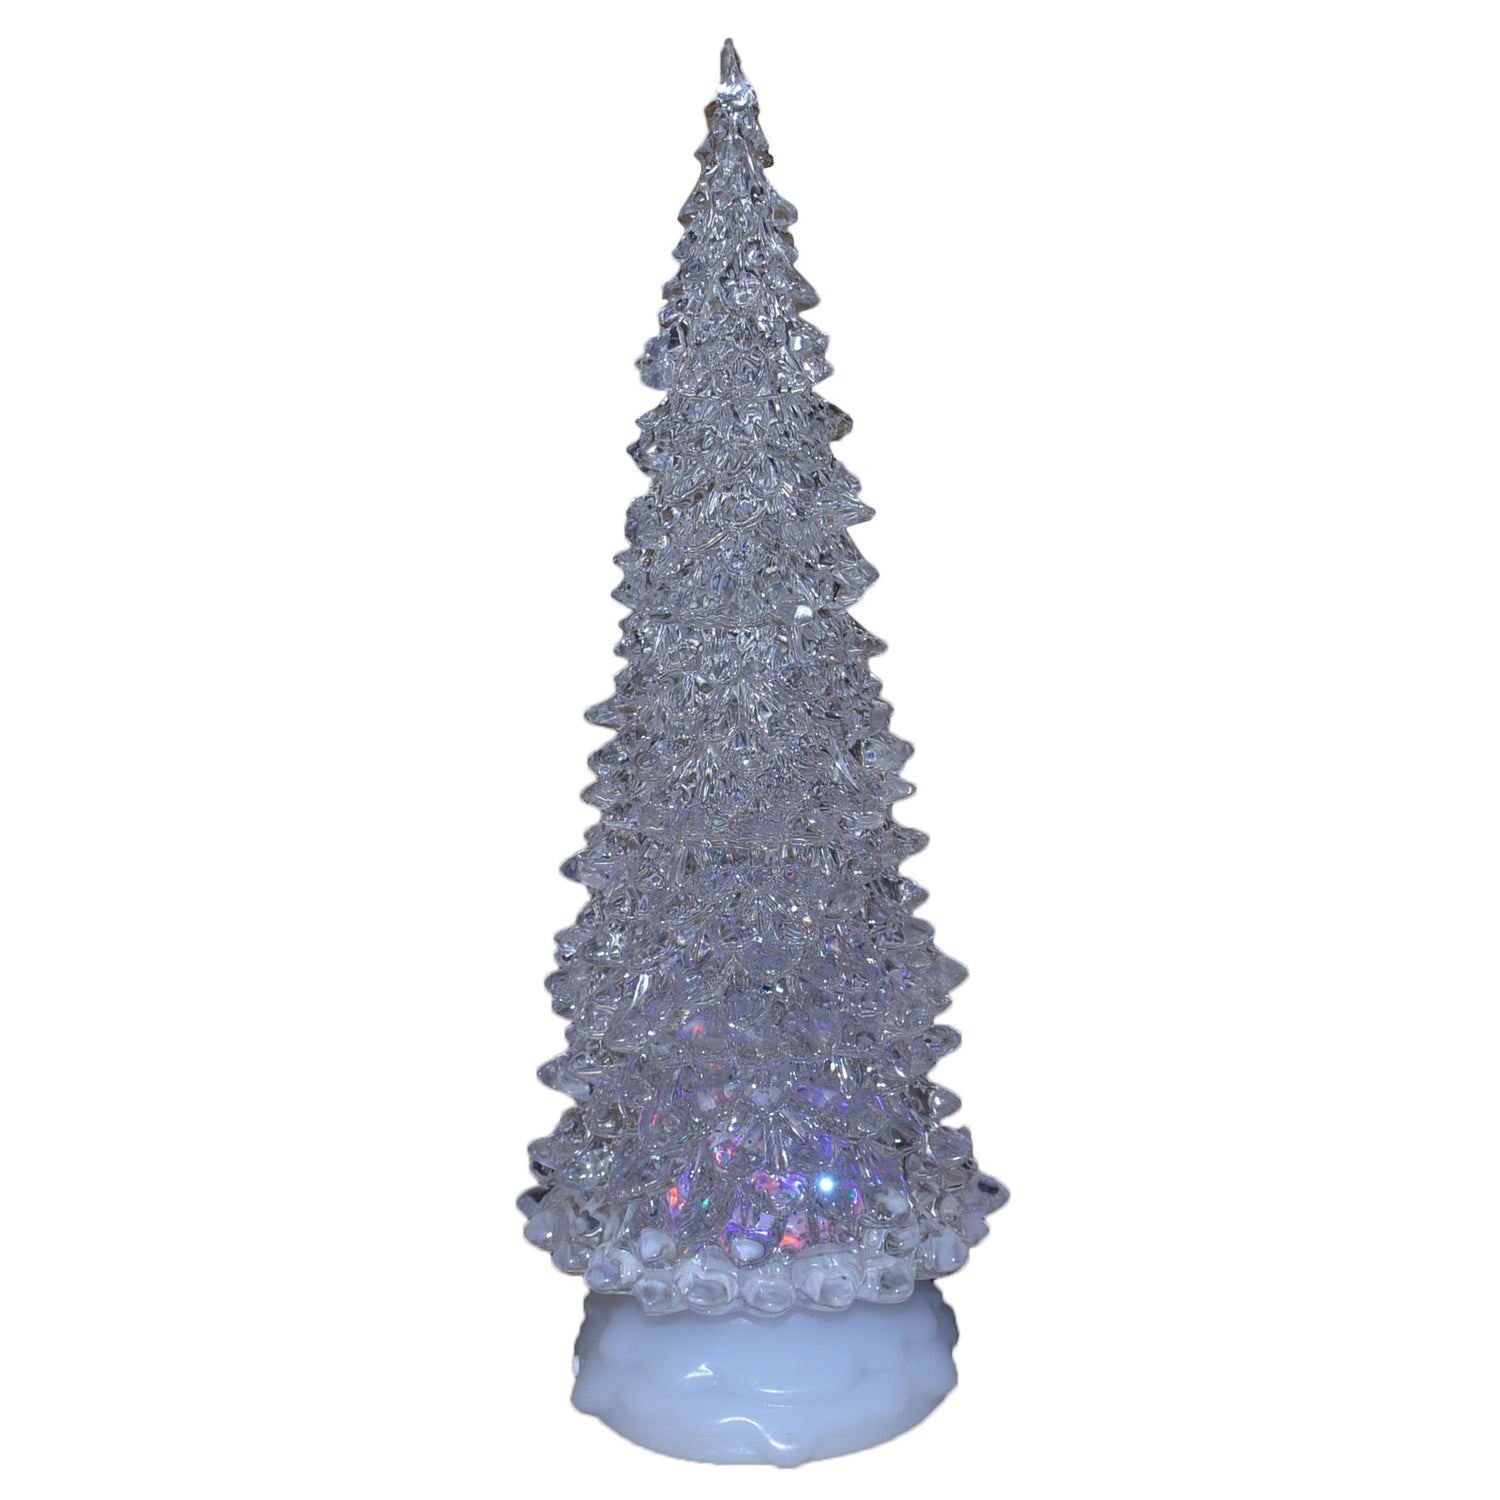 Premier Battery Operated Water Spinner Christmas Tree | Discounts on ...